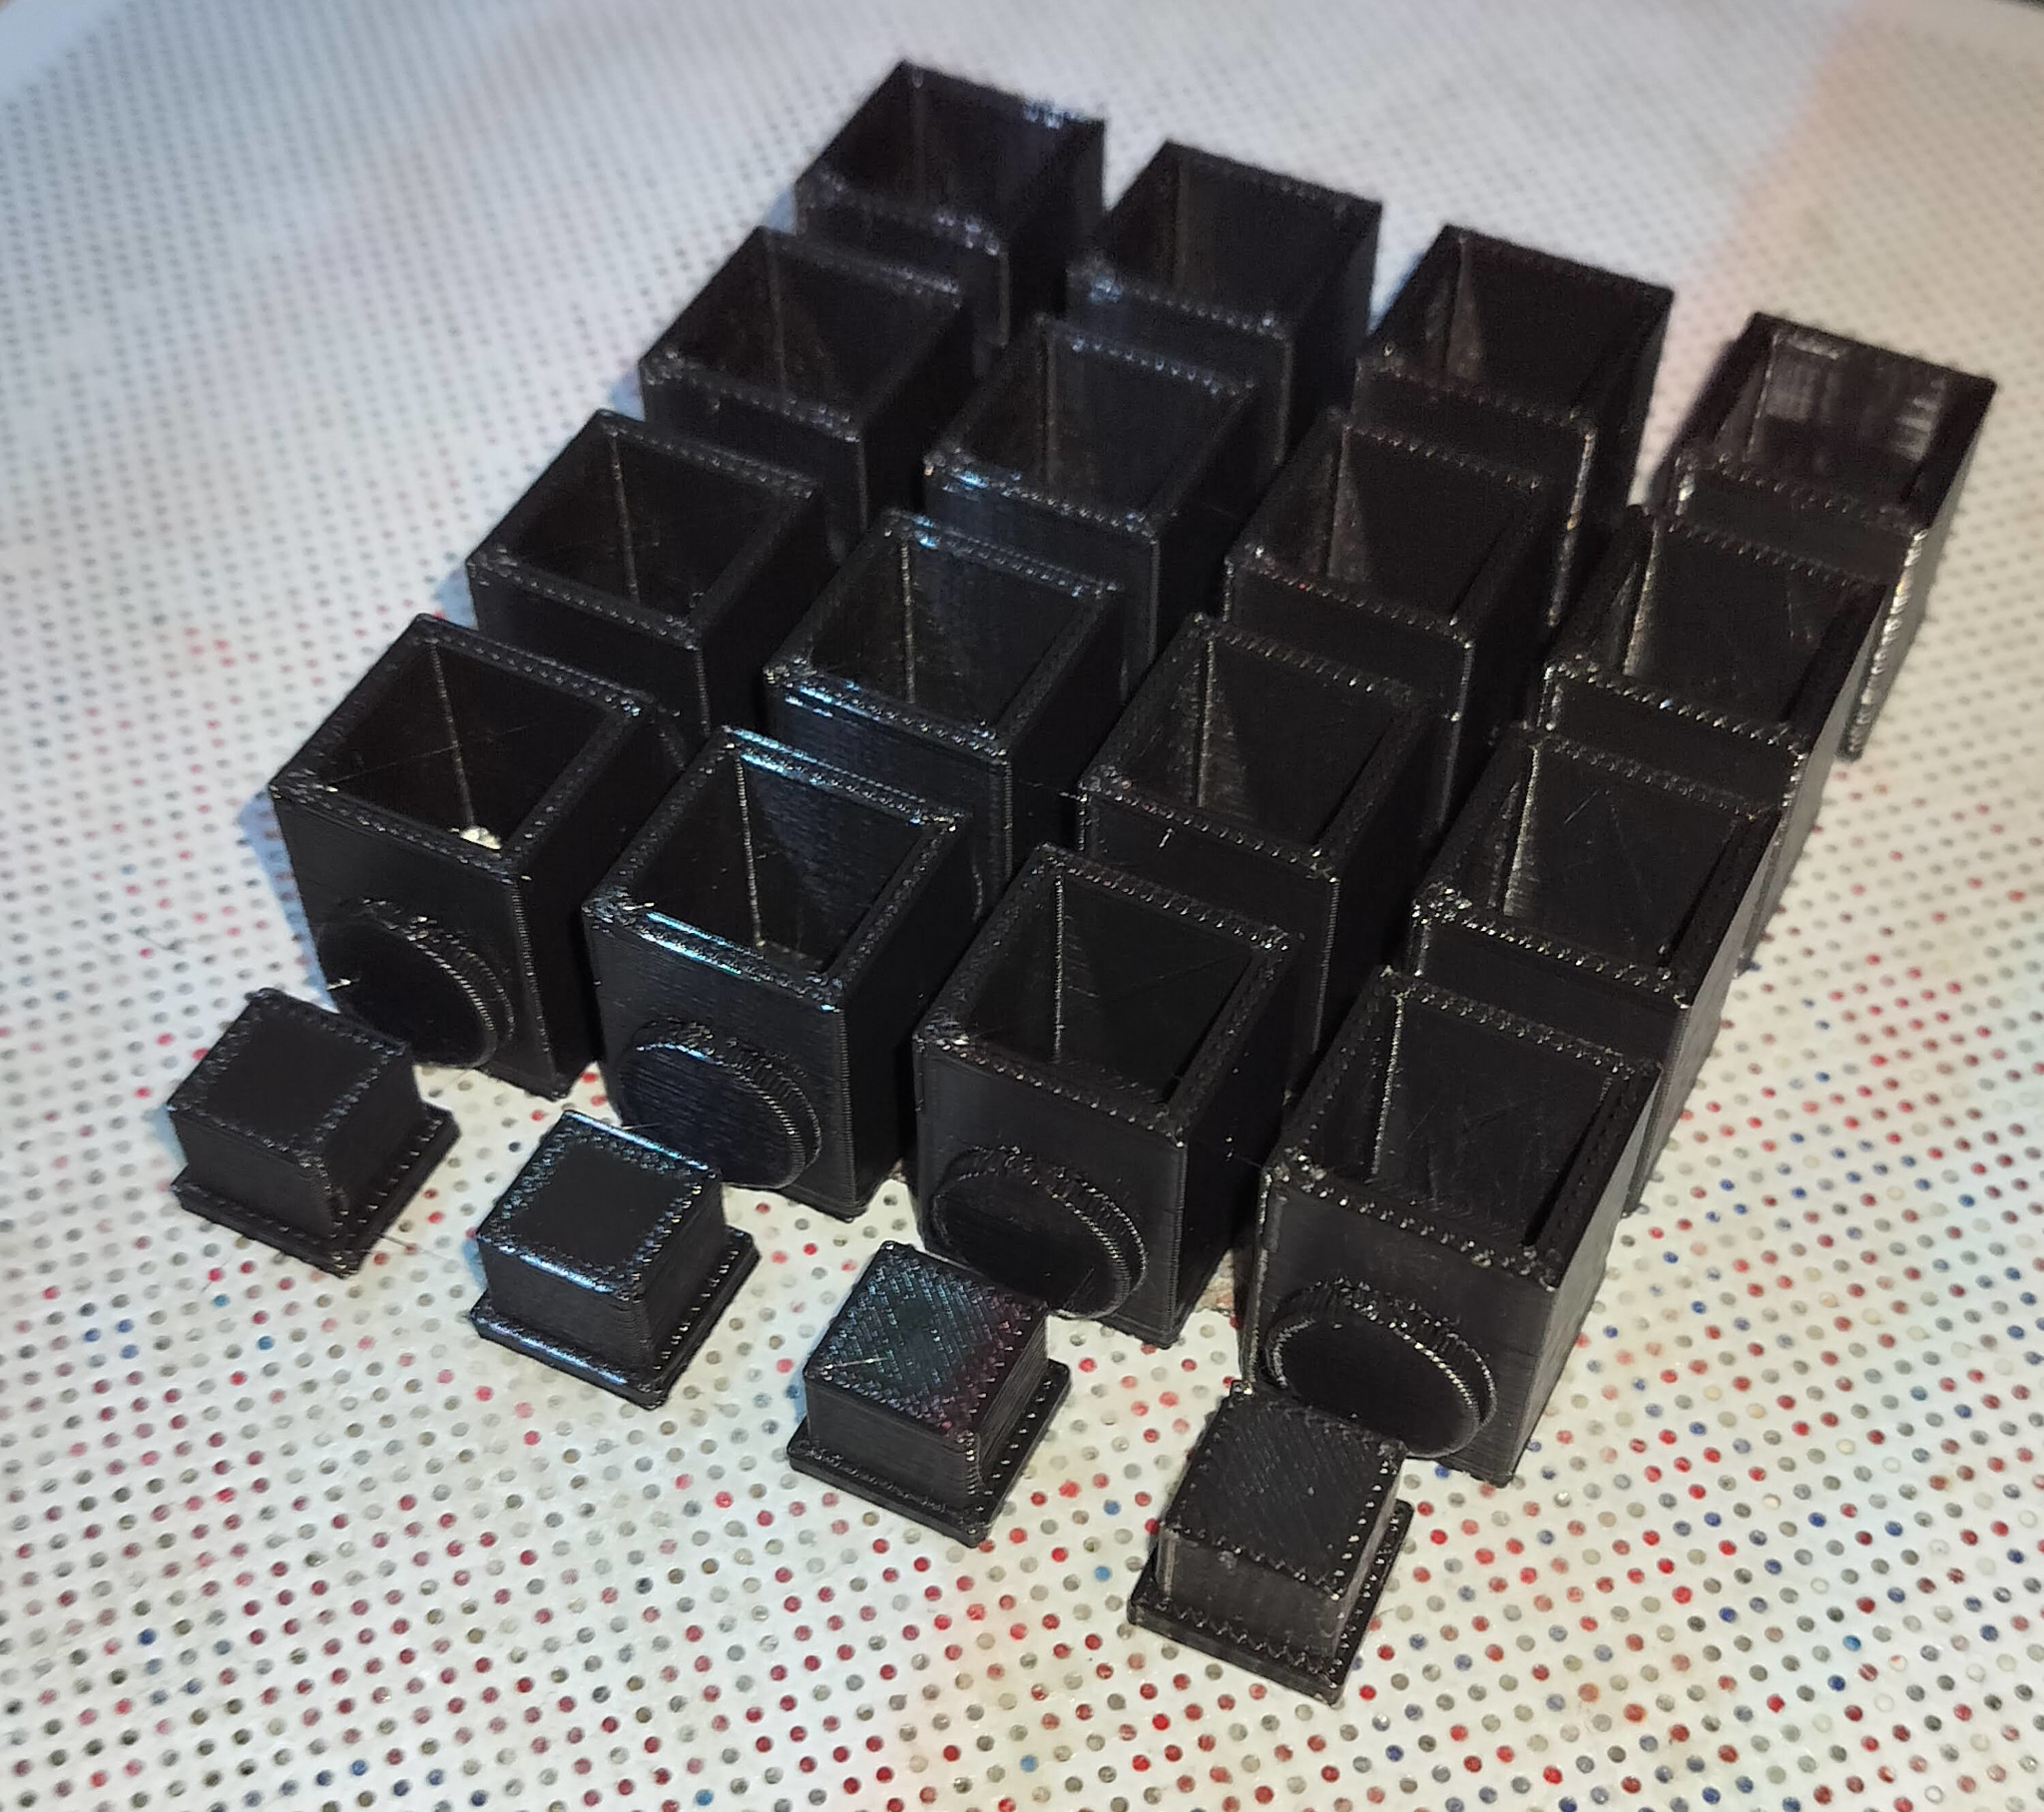 3D printing the base caps